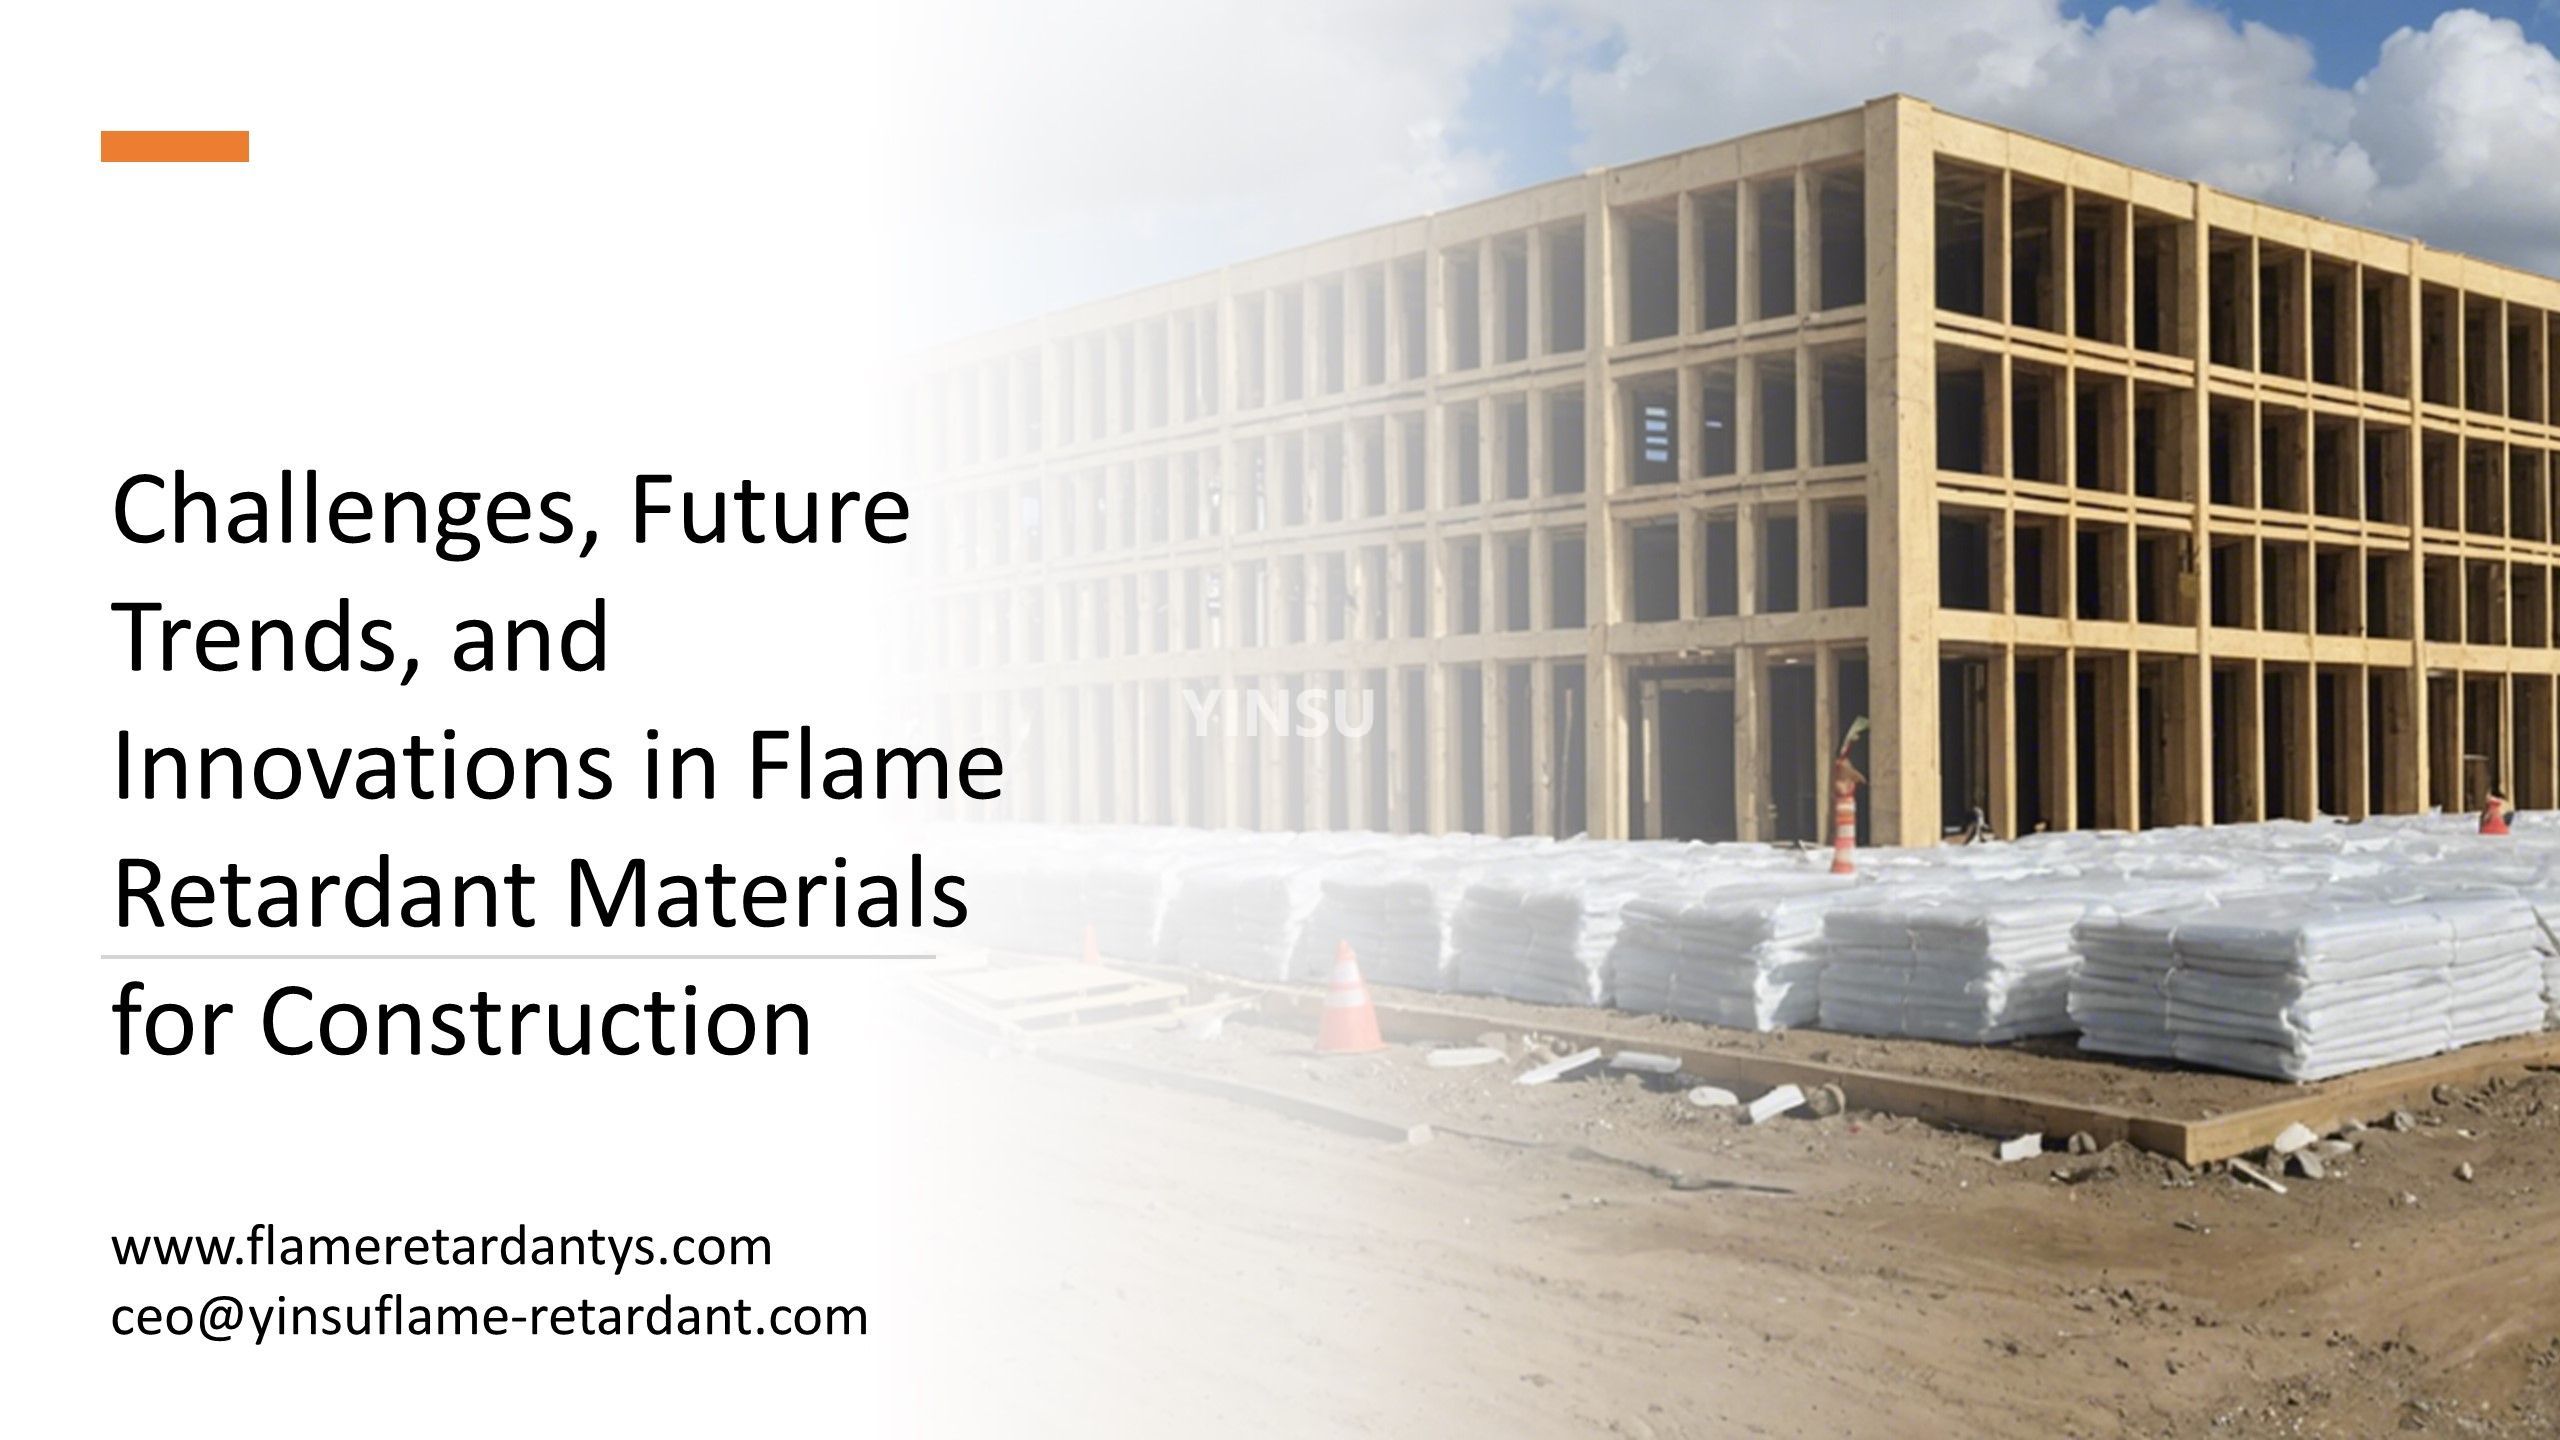 8.12 Challenges, Future Trends, and Innovations in Flame Retardant Materials for Construction